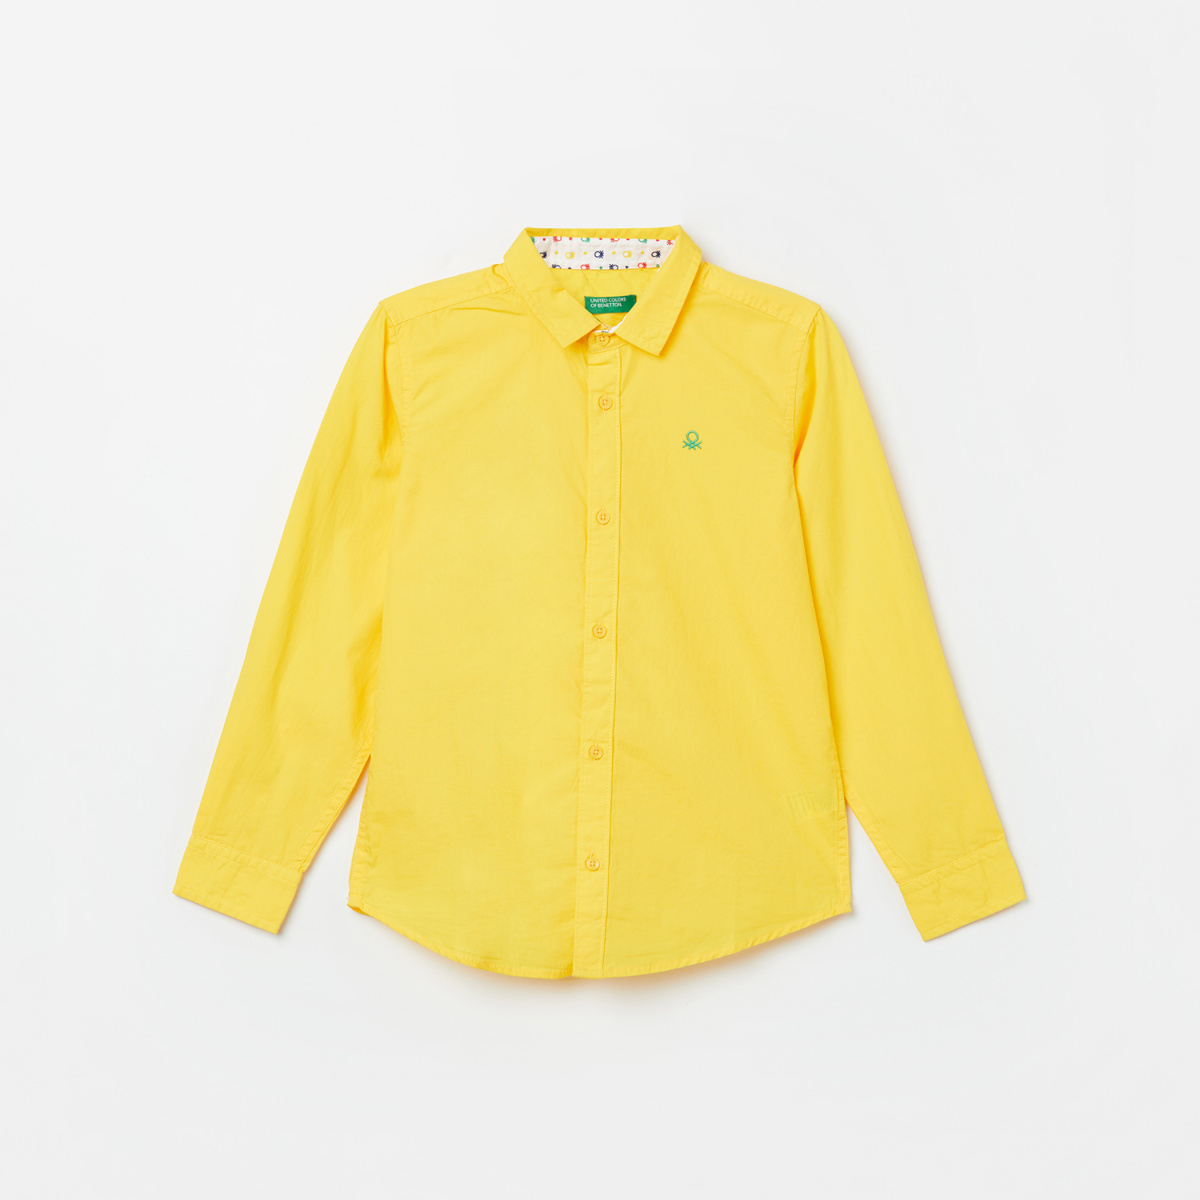 UNITED COLORS OF BENETTON Boys Solid Casual Shirt